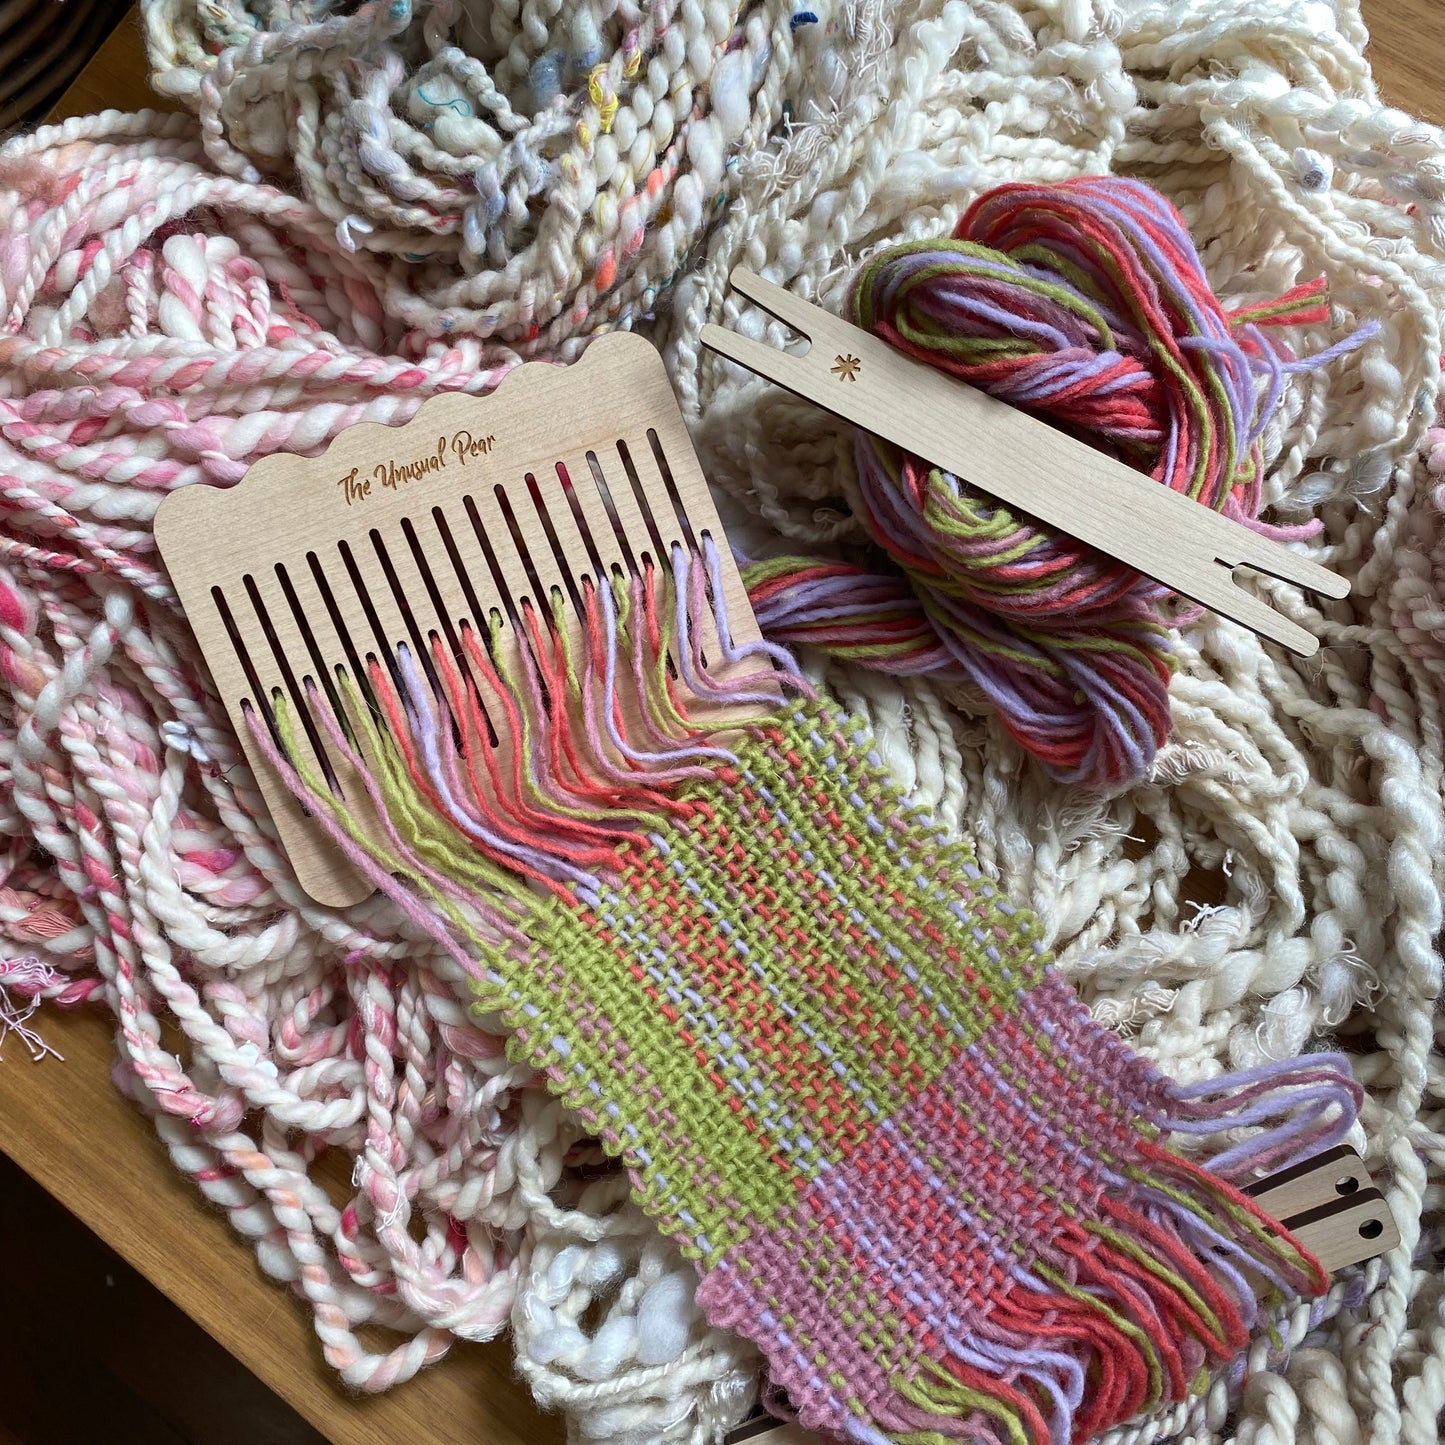 Heddle Weaver Kit - The Unusual Pear